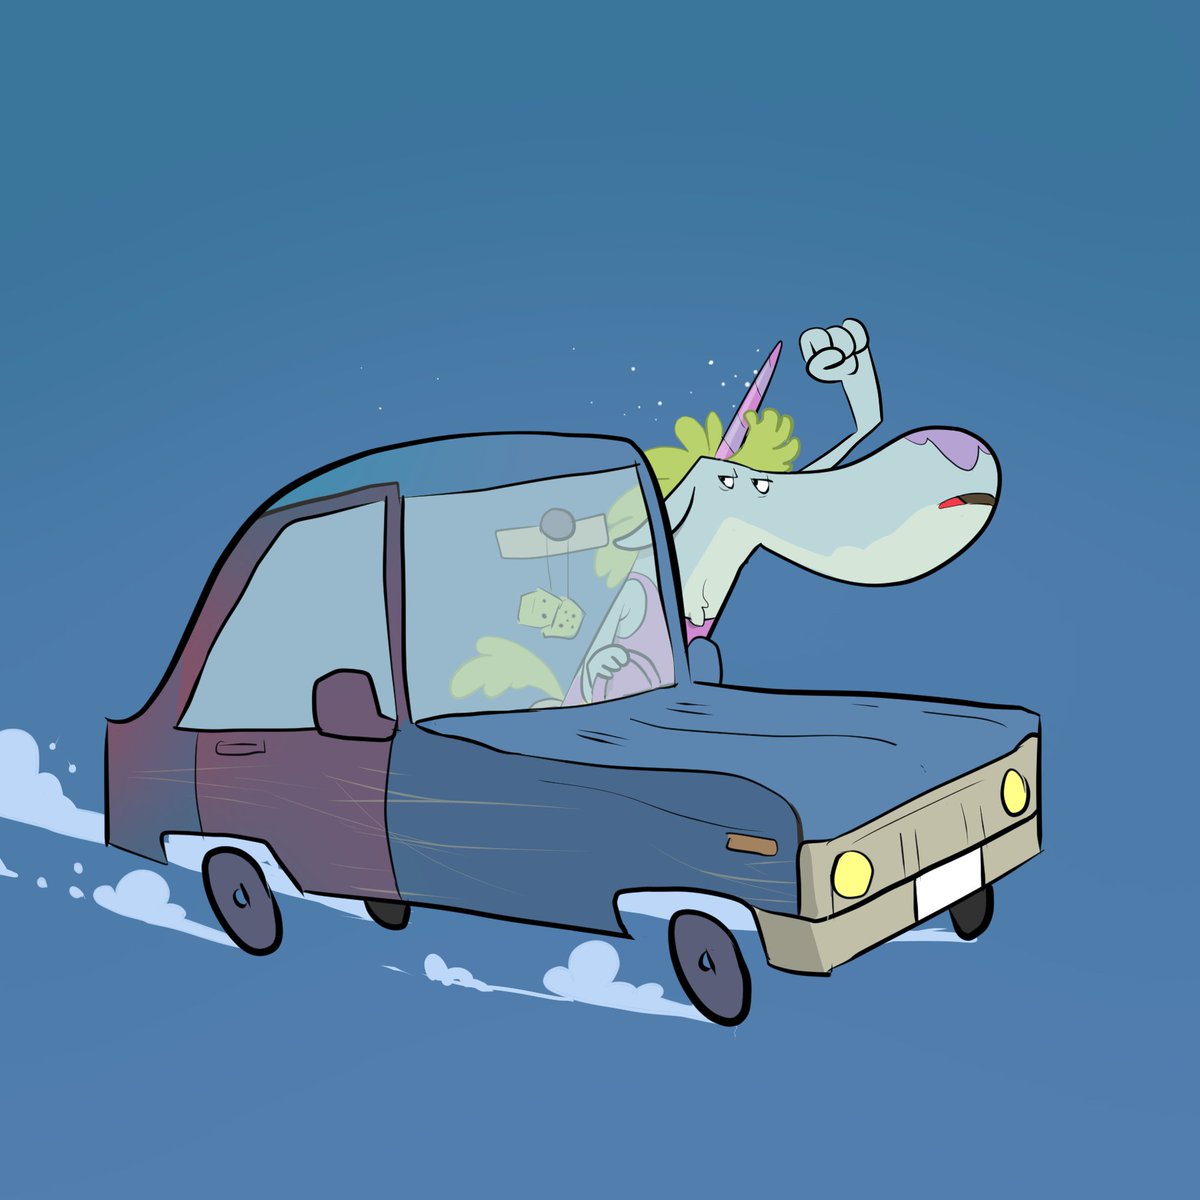 Just your run of the mill unicorn.

#unicorn #mythicalcreature #carchase #characterdesign #sillyart